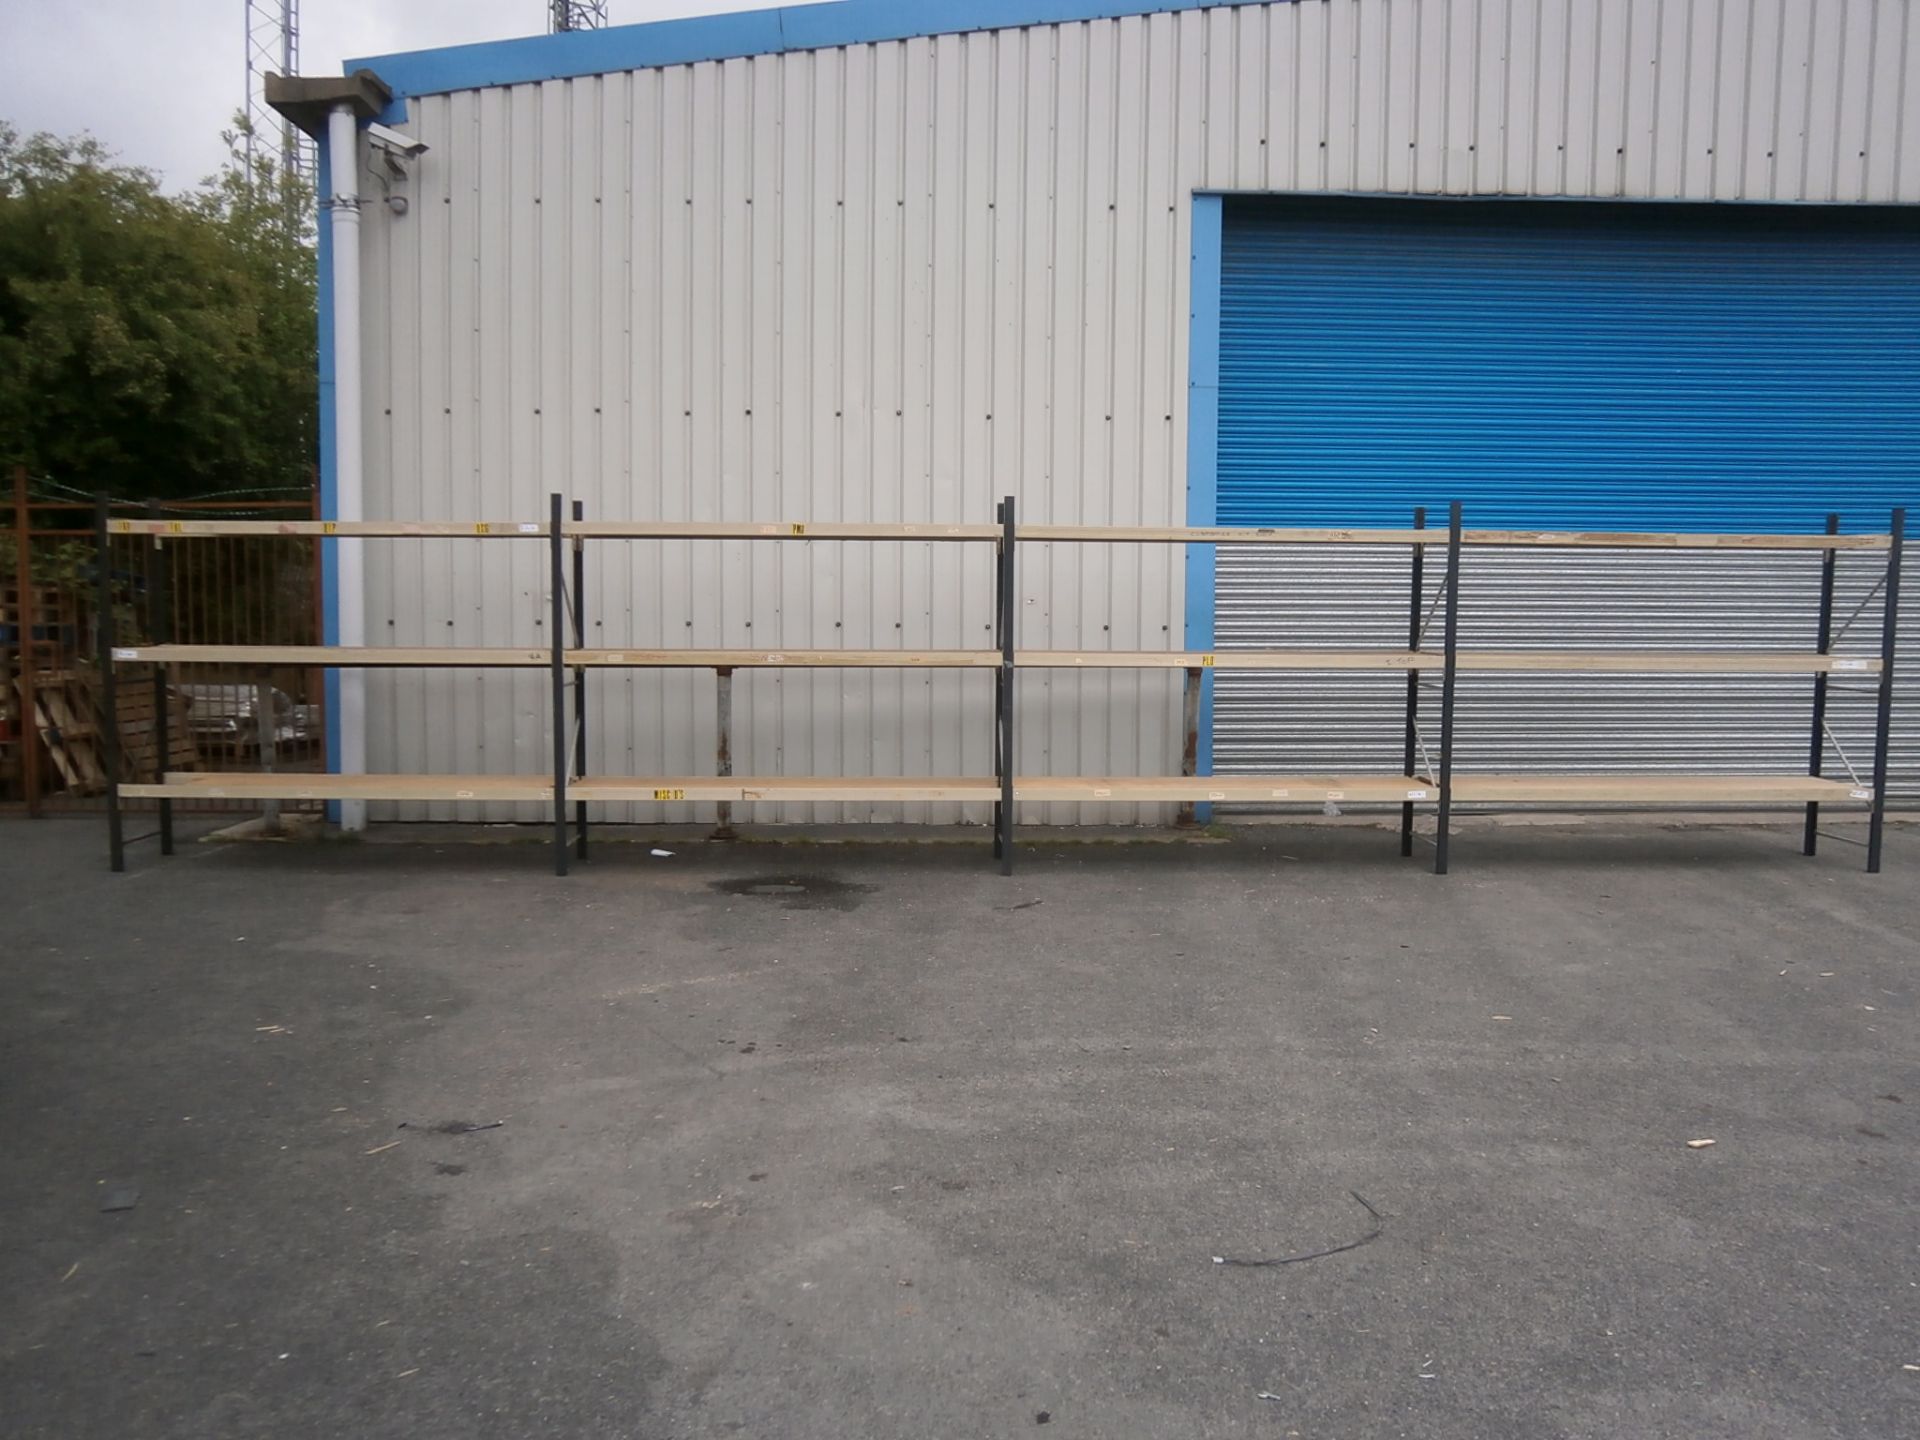 4 x Bays of Commercial Racking - Includes 5 x Uprights, 24 x Beams and 12 x Boards (H - 2100mm,